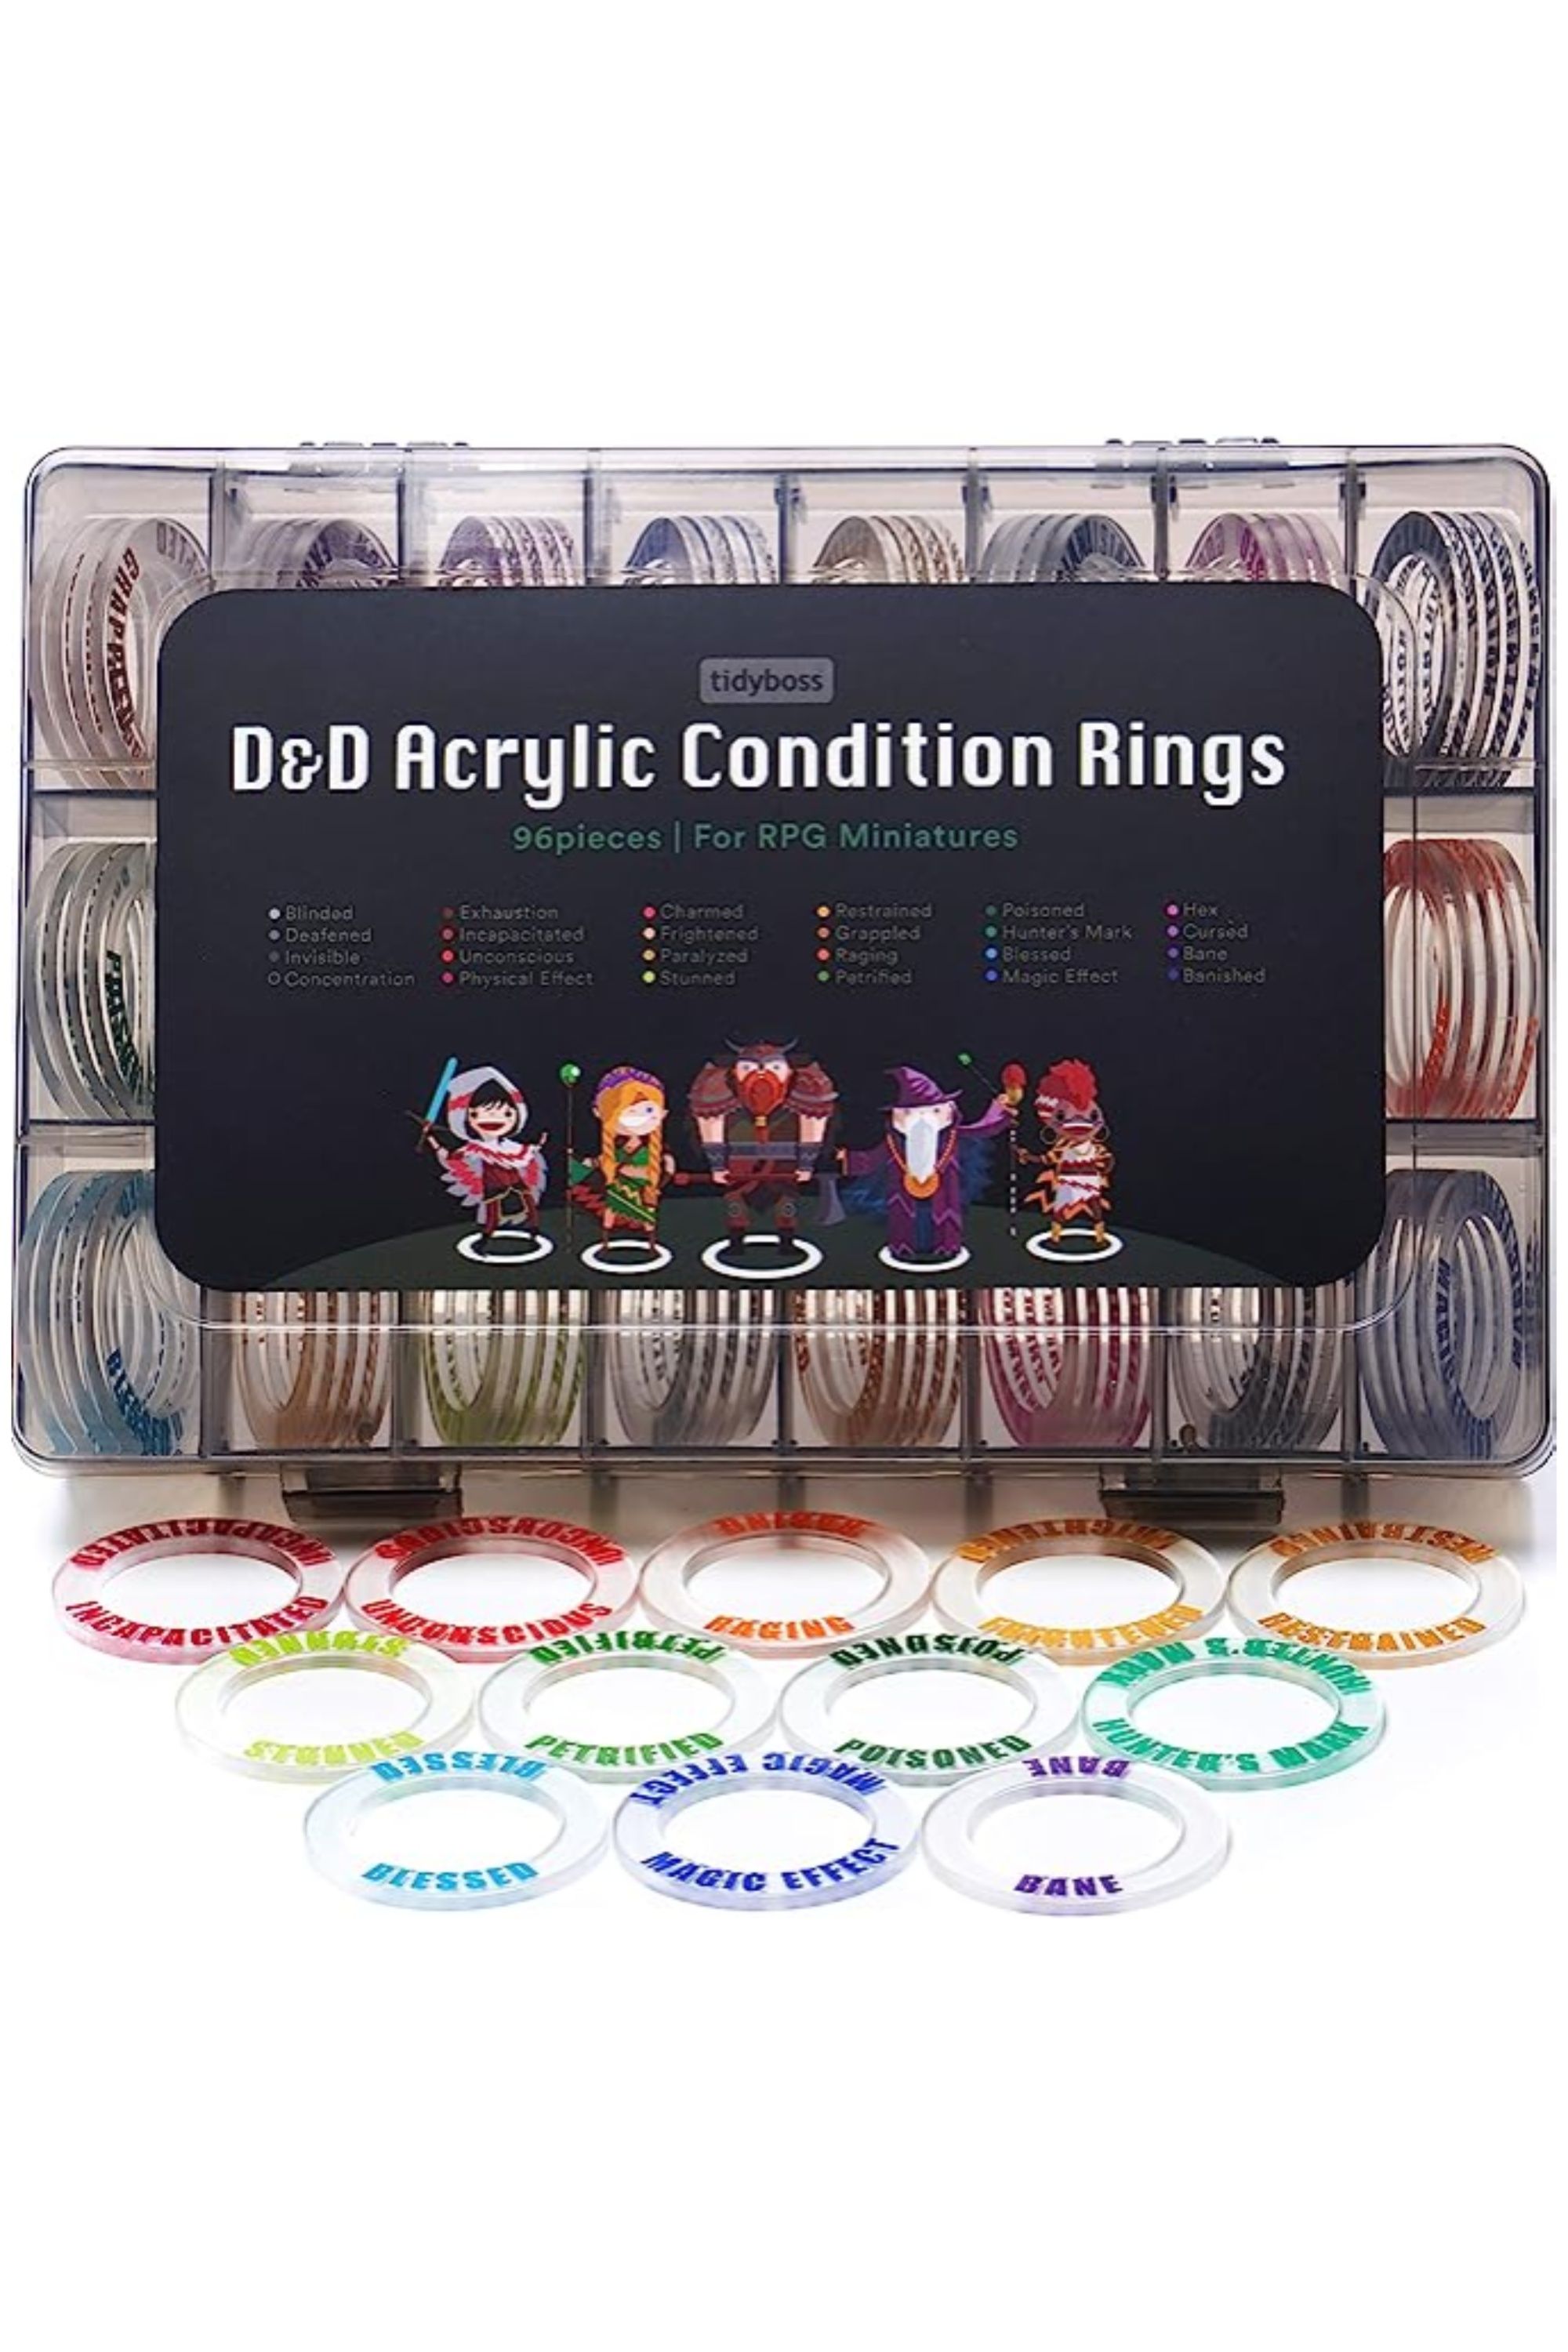 DND Acrylic Condition Rings